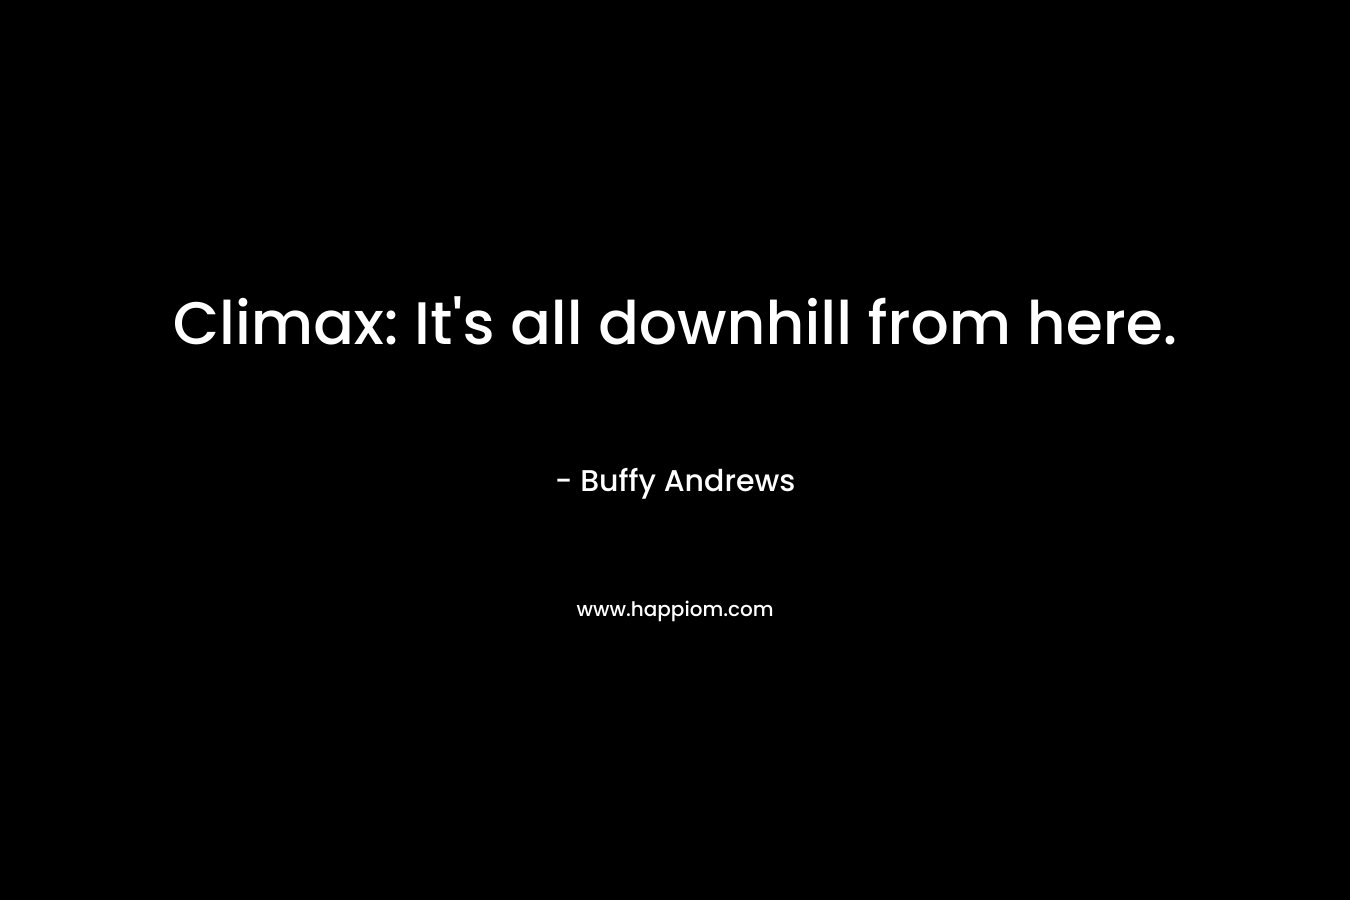 Climax: It’s all downhill from here. – Buffy Andrews